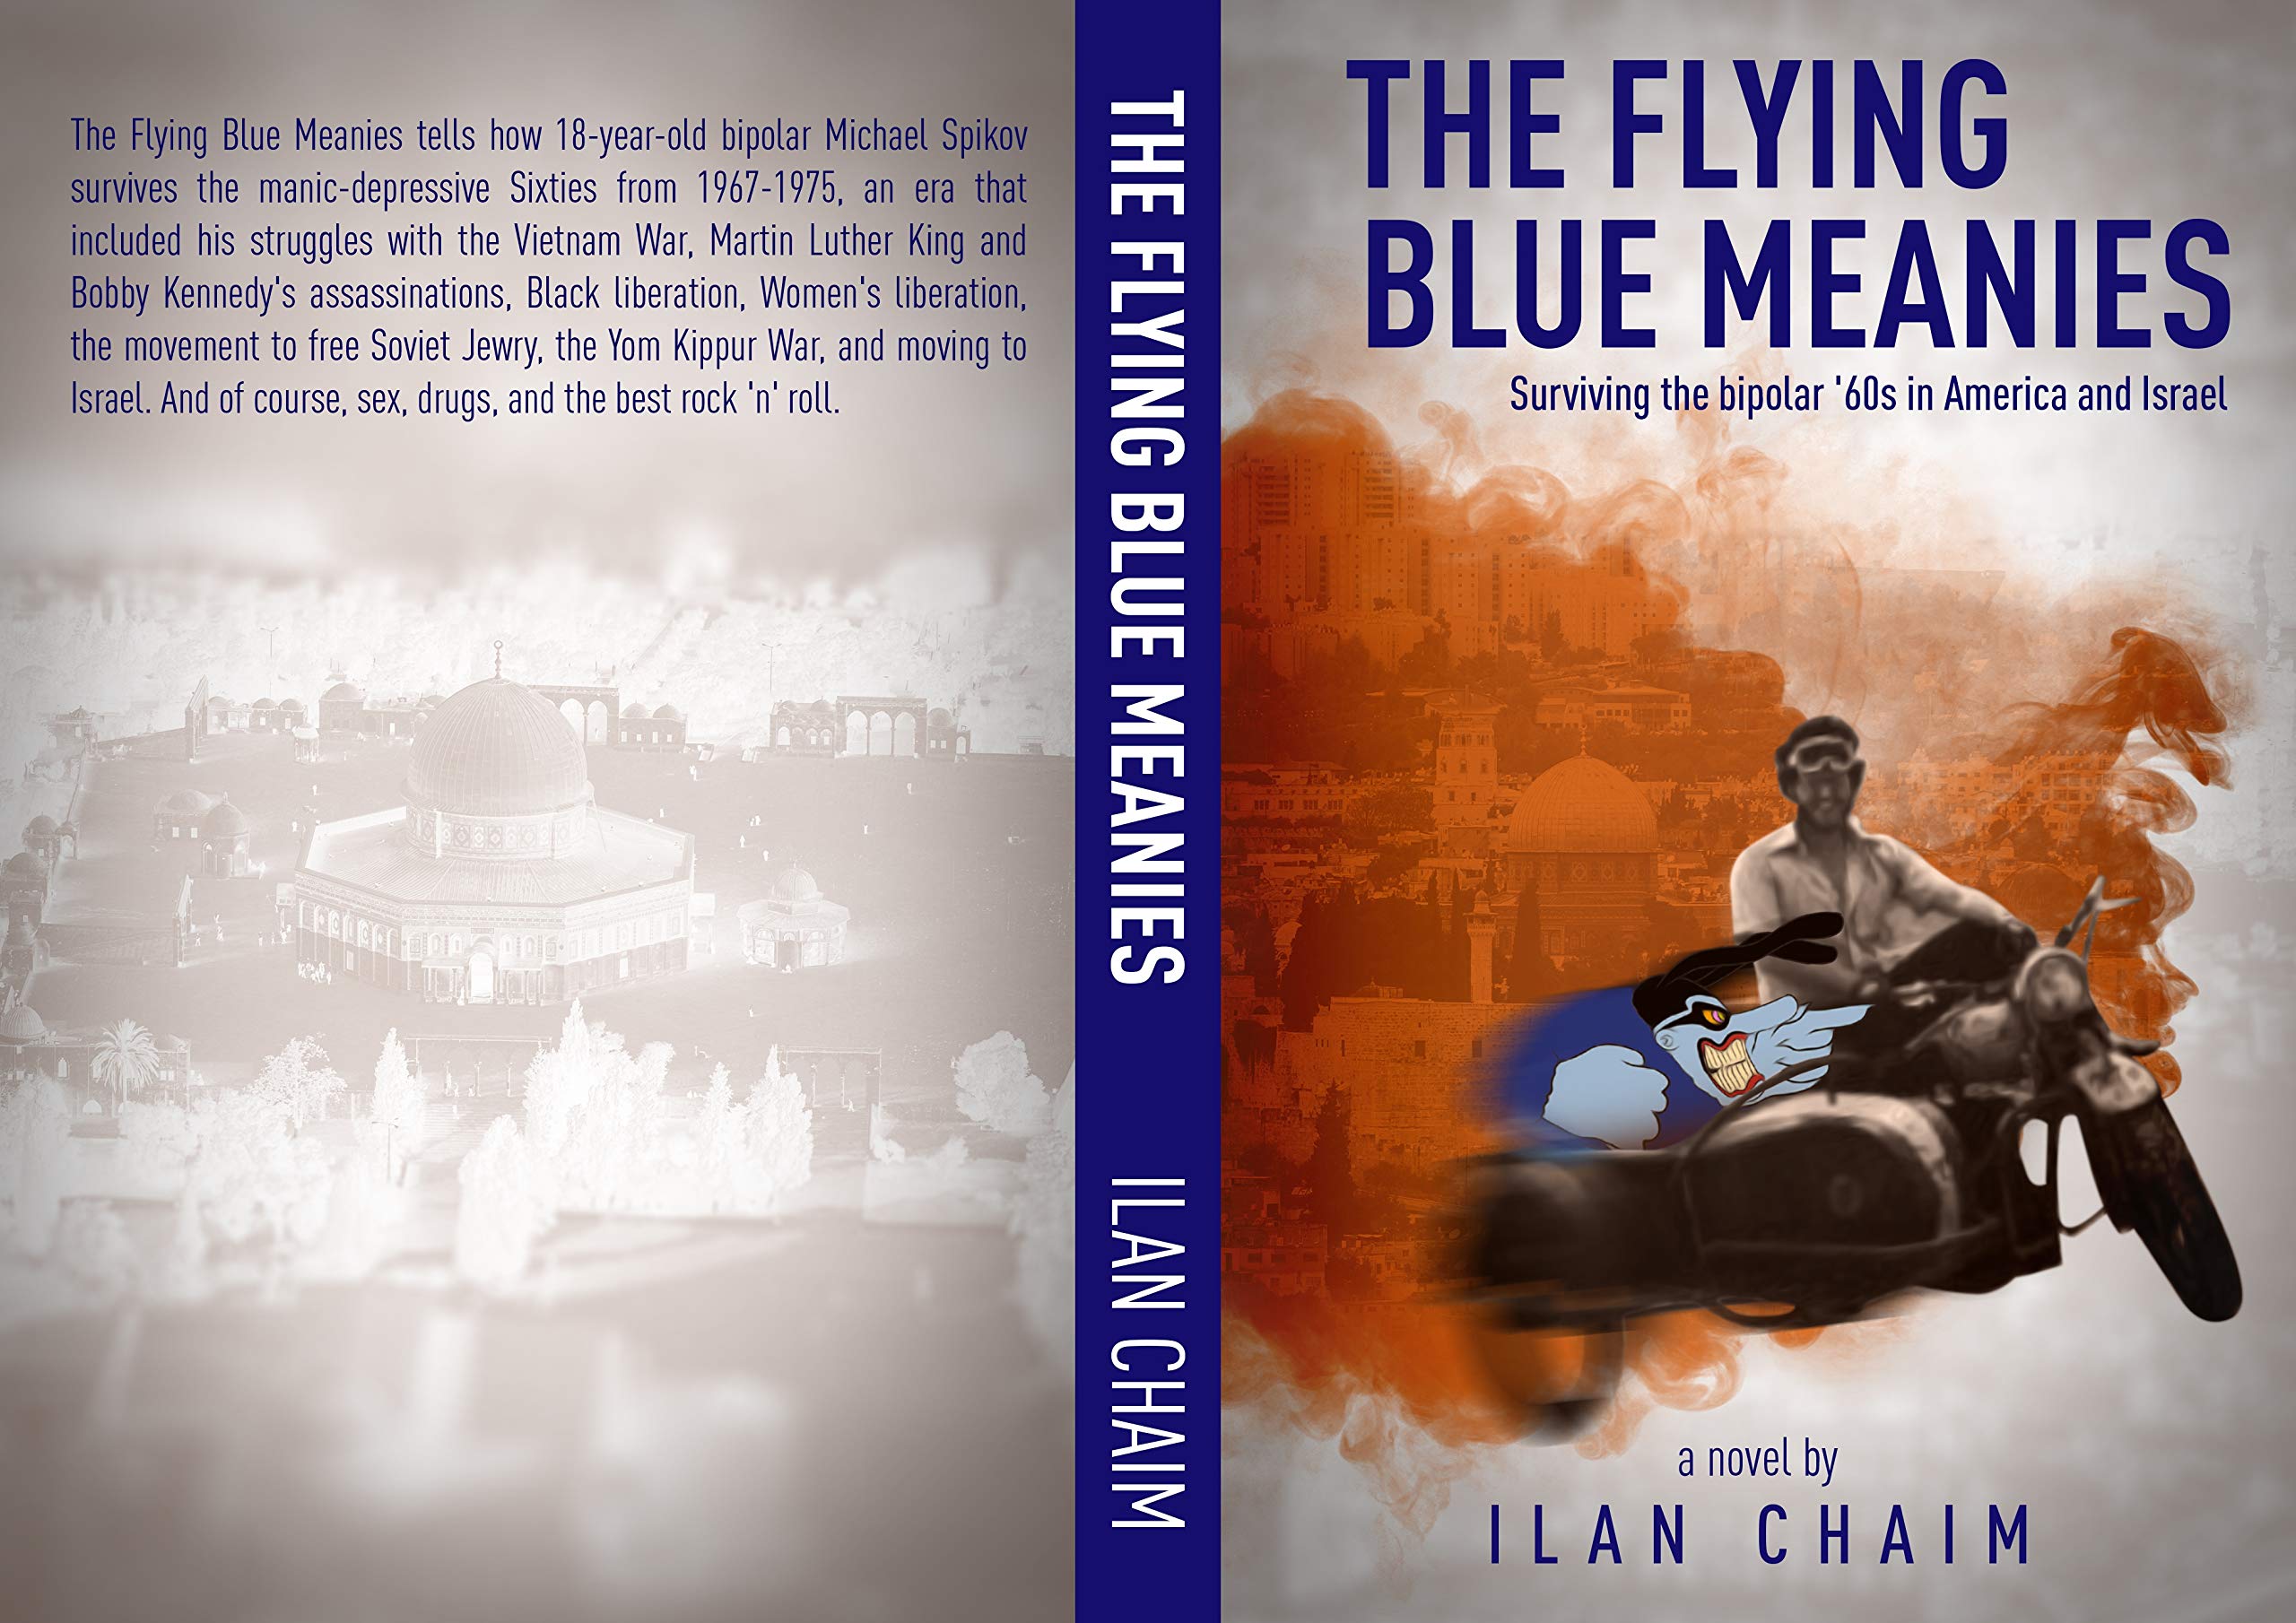 THE FLYING BLUE MEANIES: Surviving the bipolar '60s in America and Israel